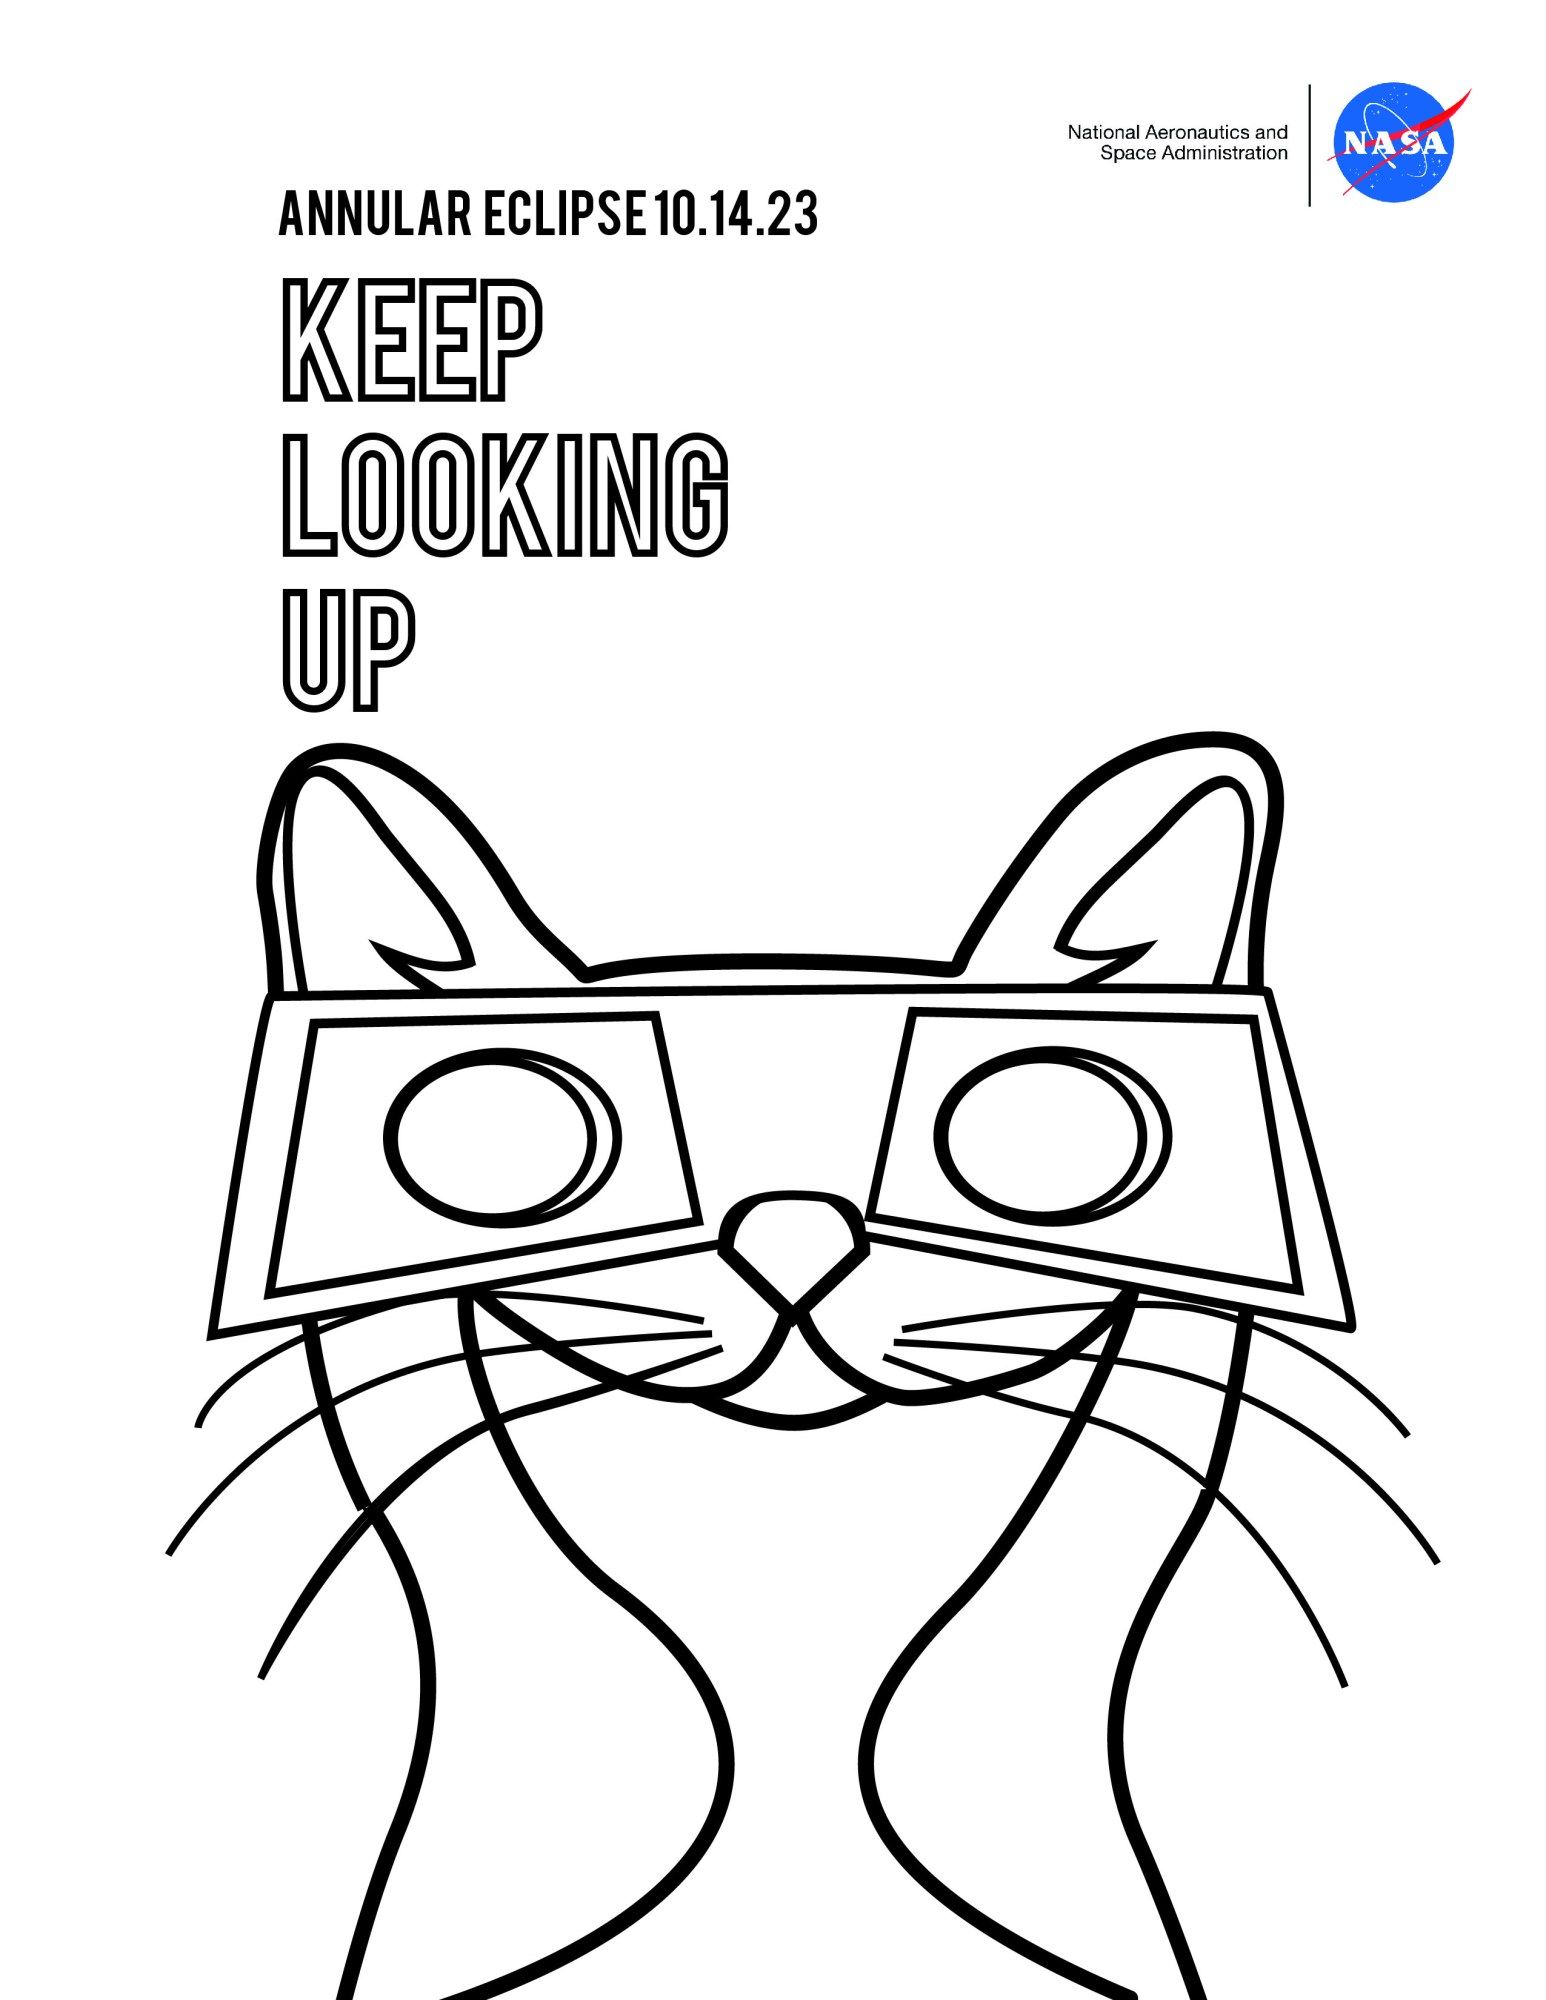 A cat, shown from the chest up, wearing eclipse glasses, which are reflecting the annular eclipse in the lenses. The sheet says "Annular eclipse 10.14.23. Keep Looking up." The sheet is primarily white with black outlines.